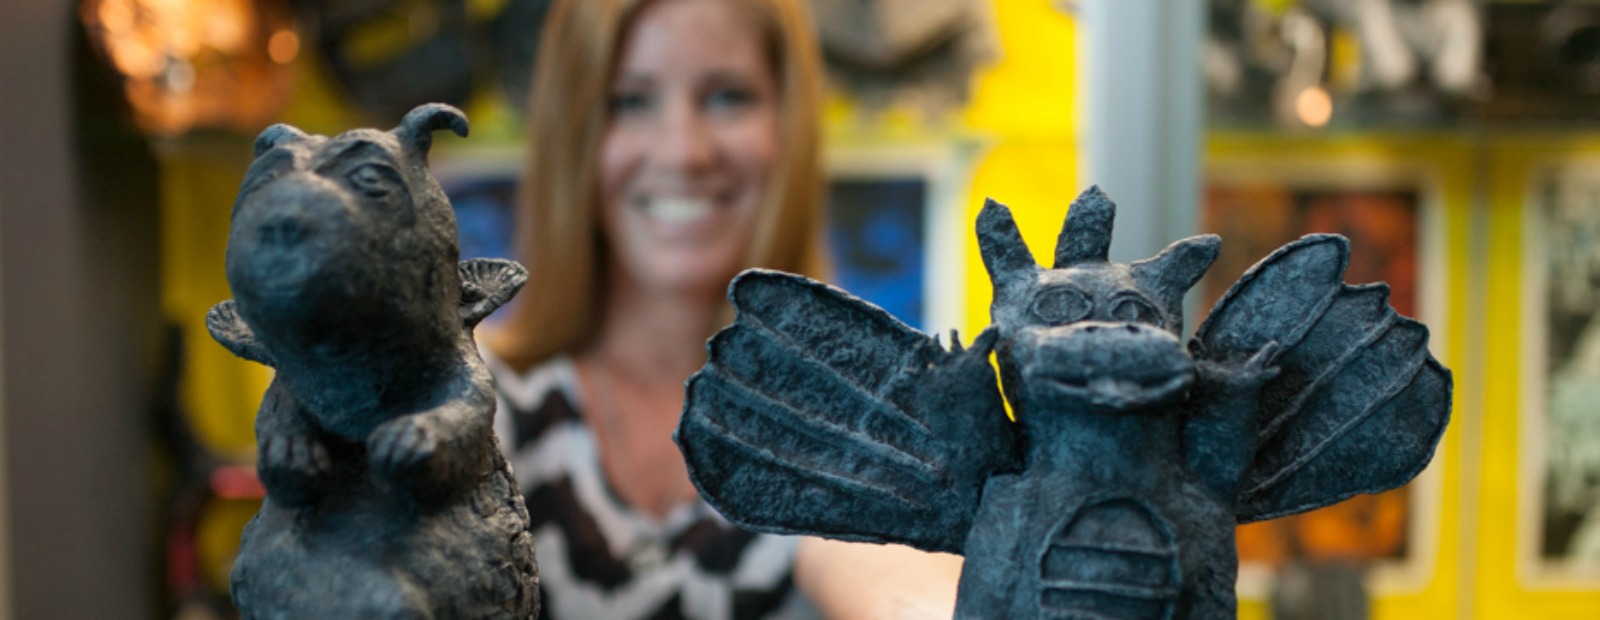 Student-made gargoyles will be on display at Art In The Park